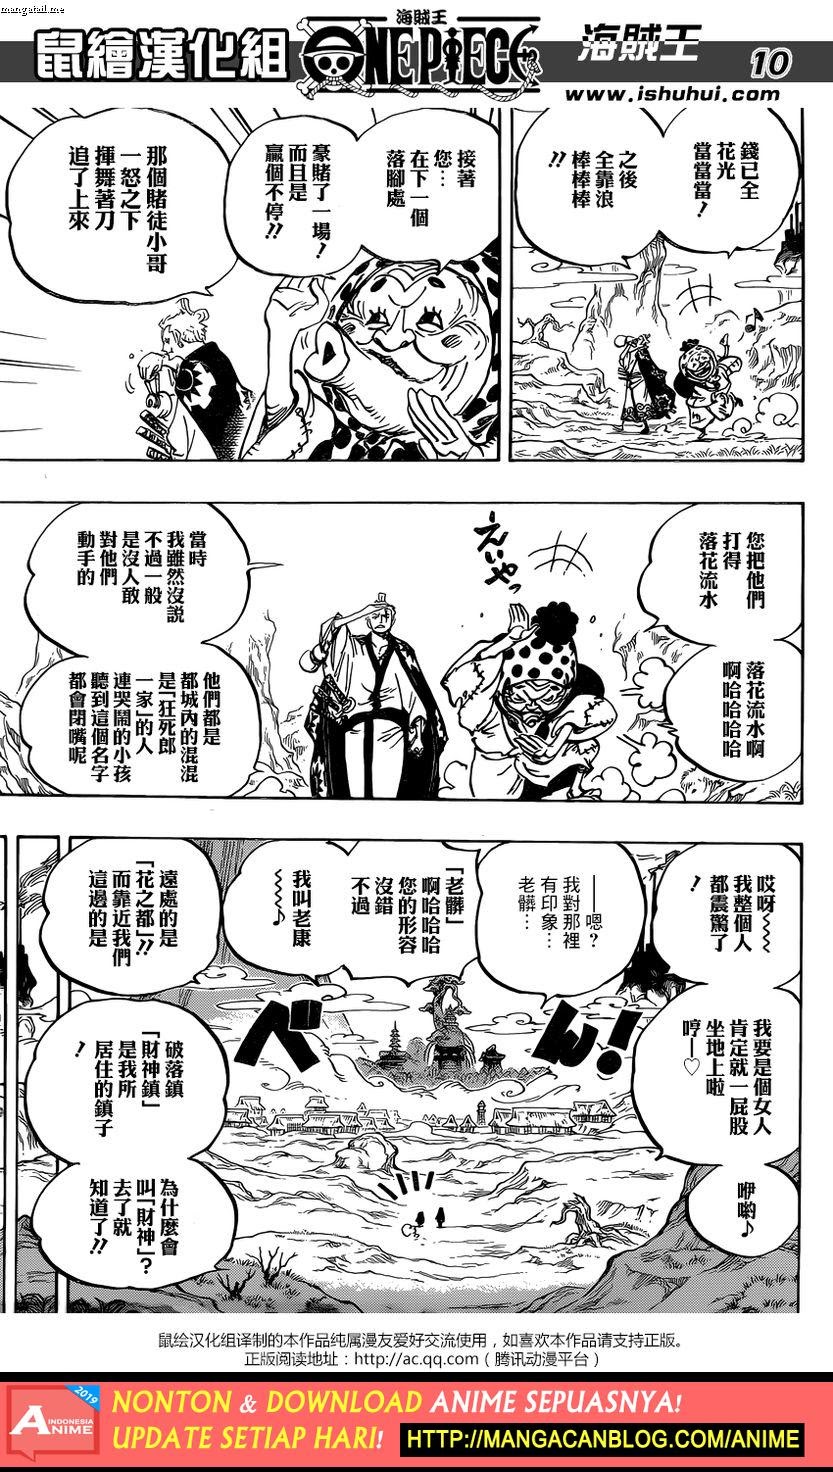 One Piece Chapter 928 – Raw - 109